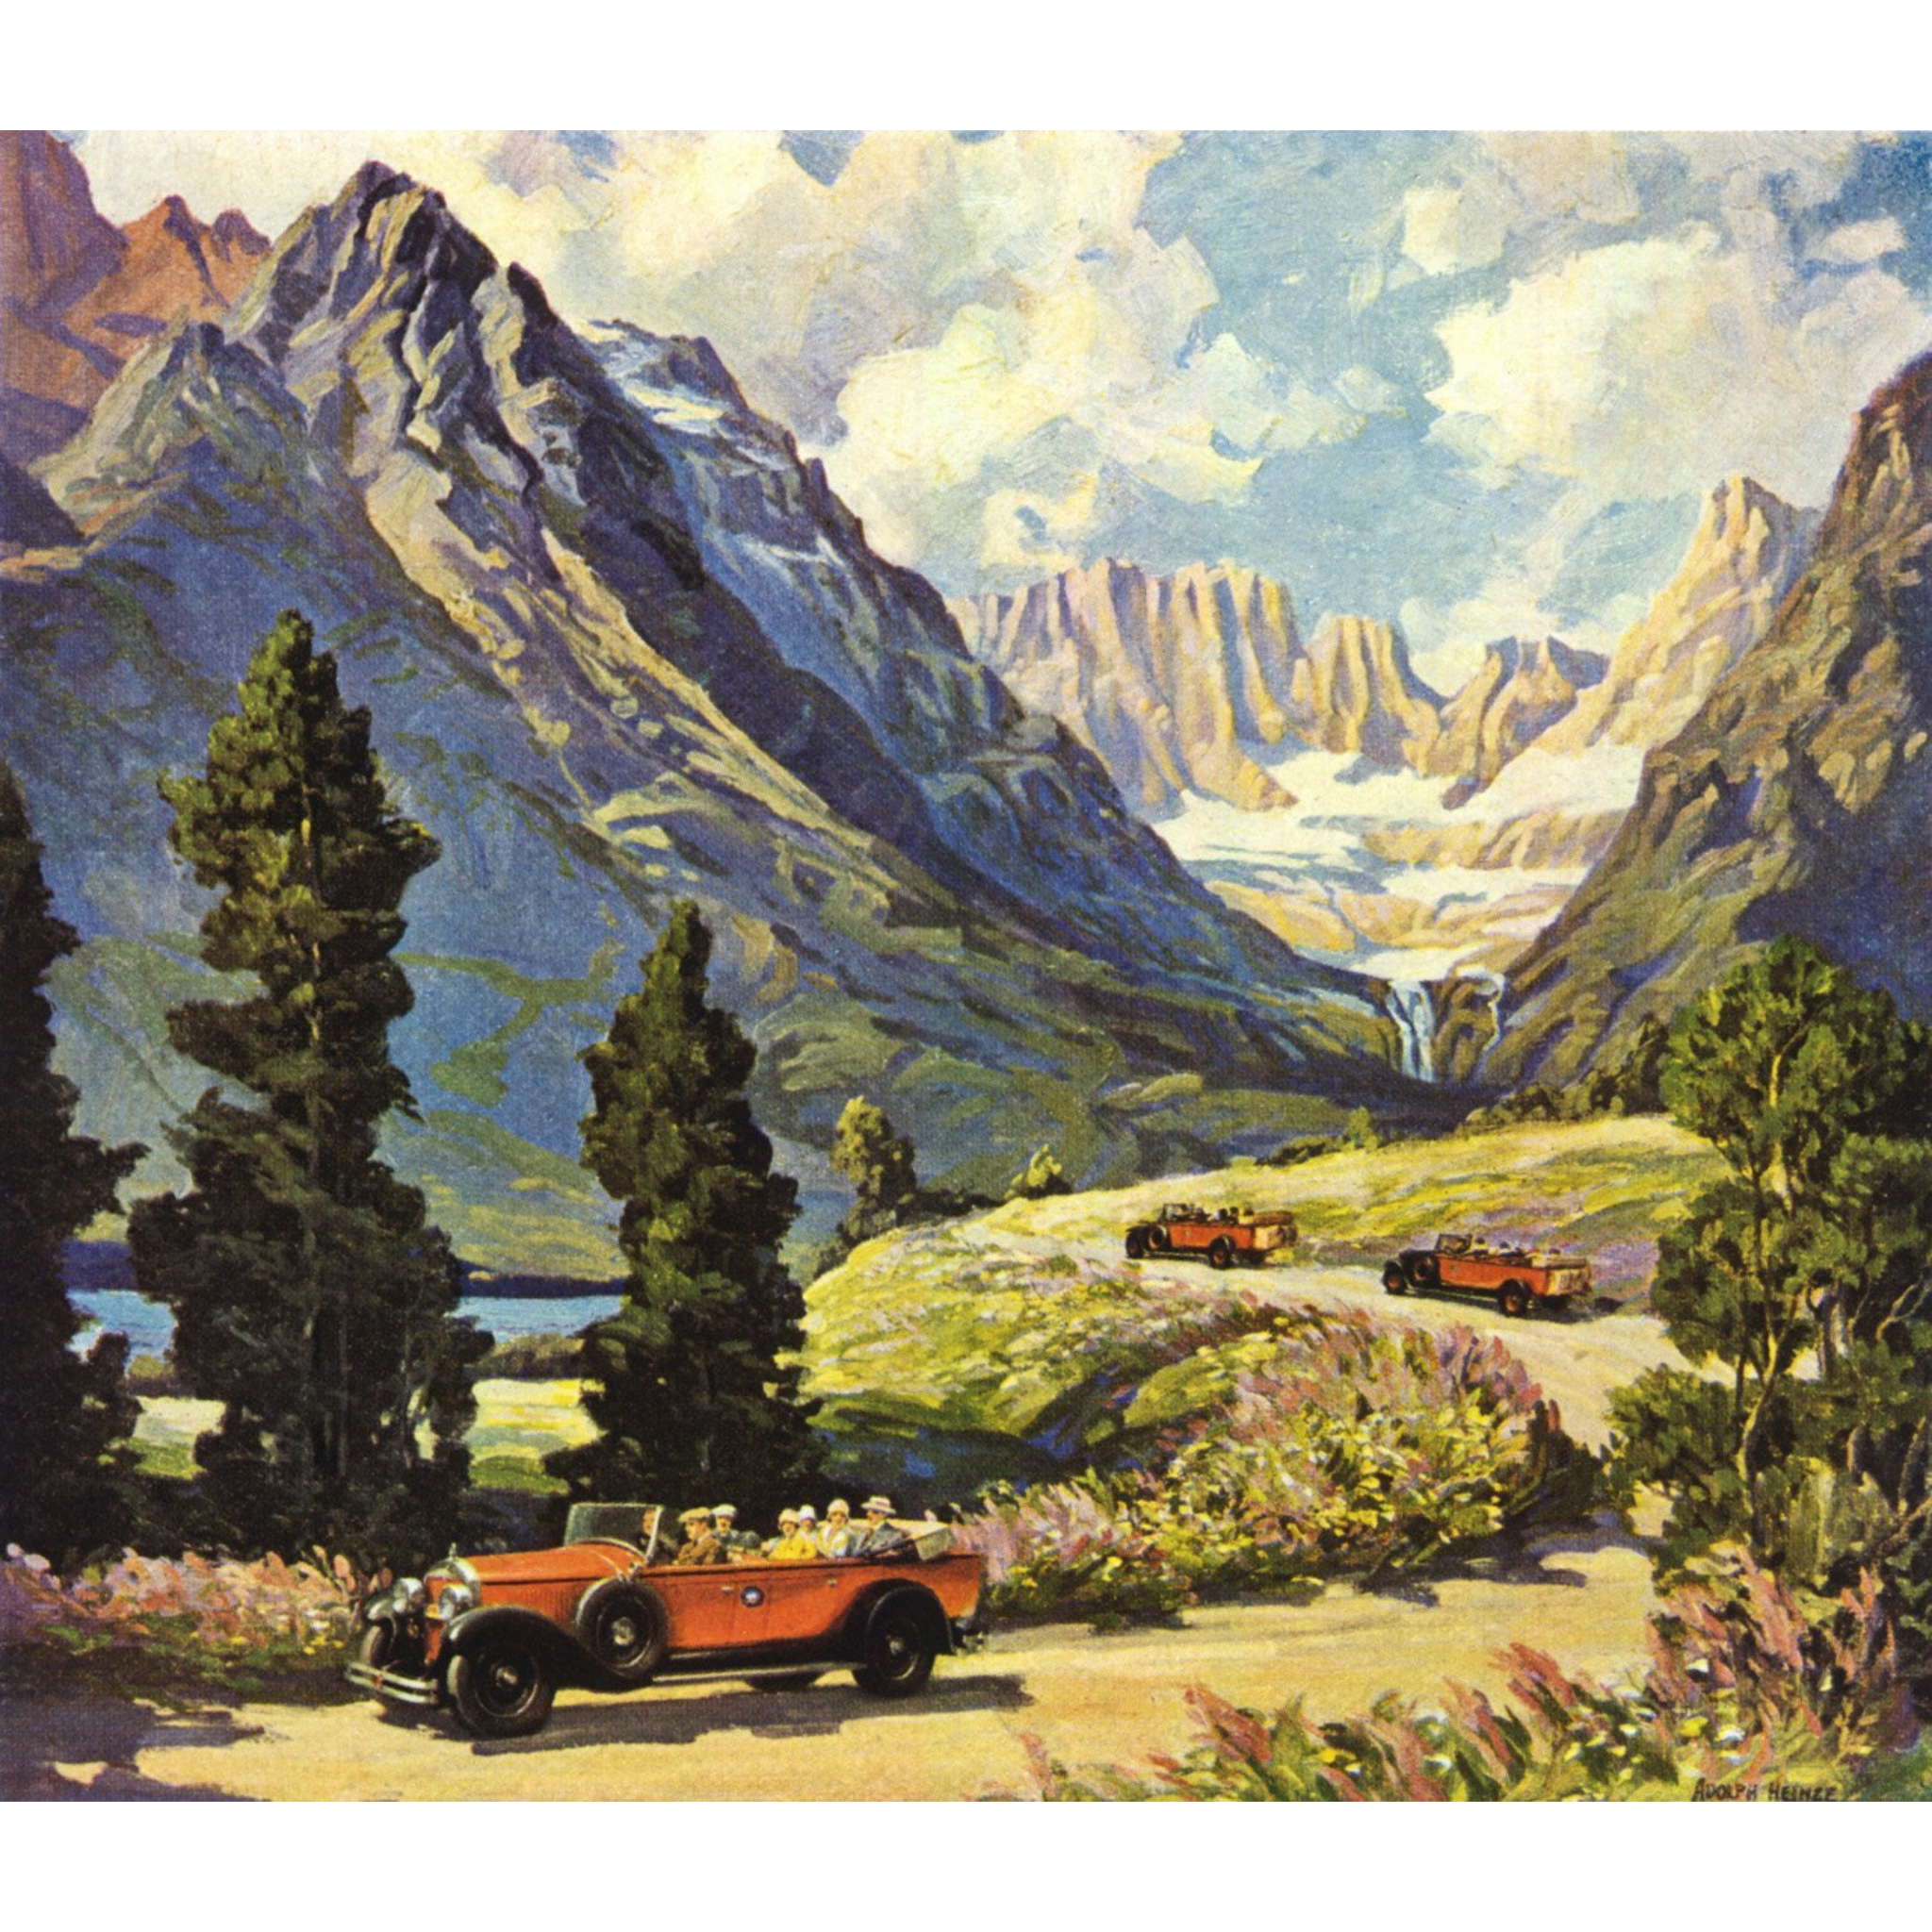 Glacier National Park: Going to the Sun Highway - ca. 1935 Lithograph